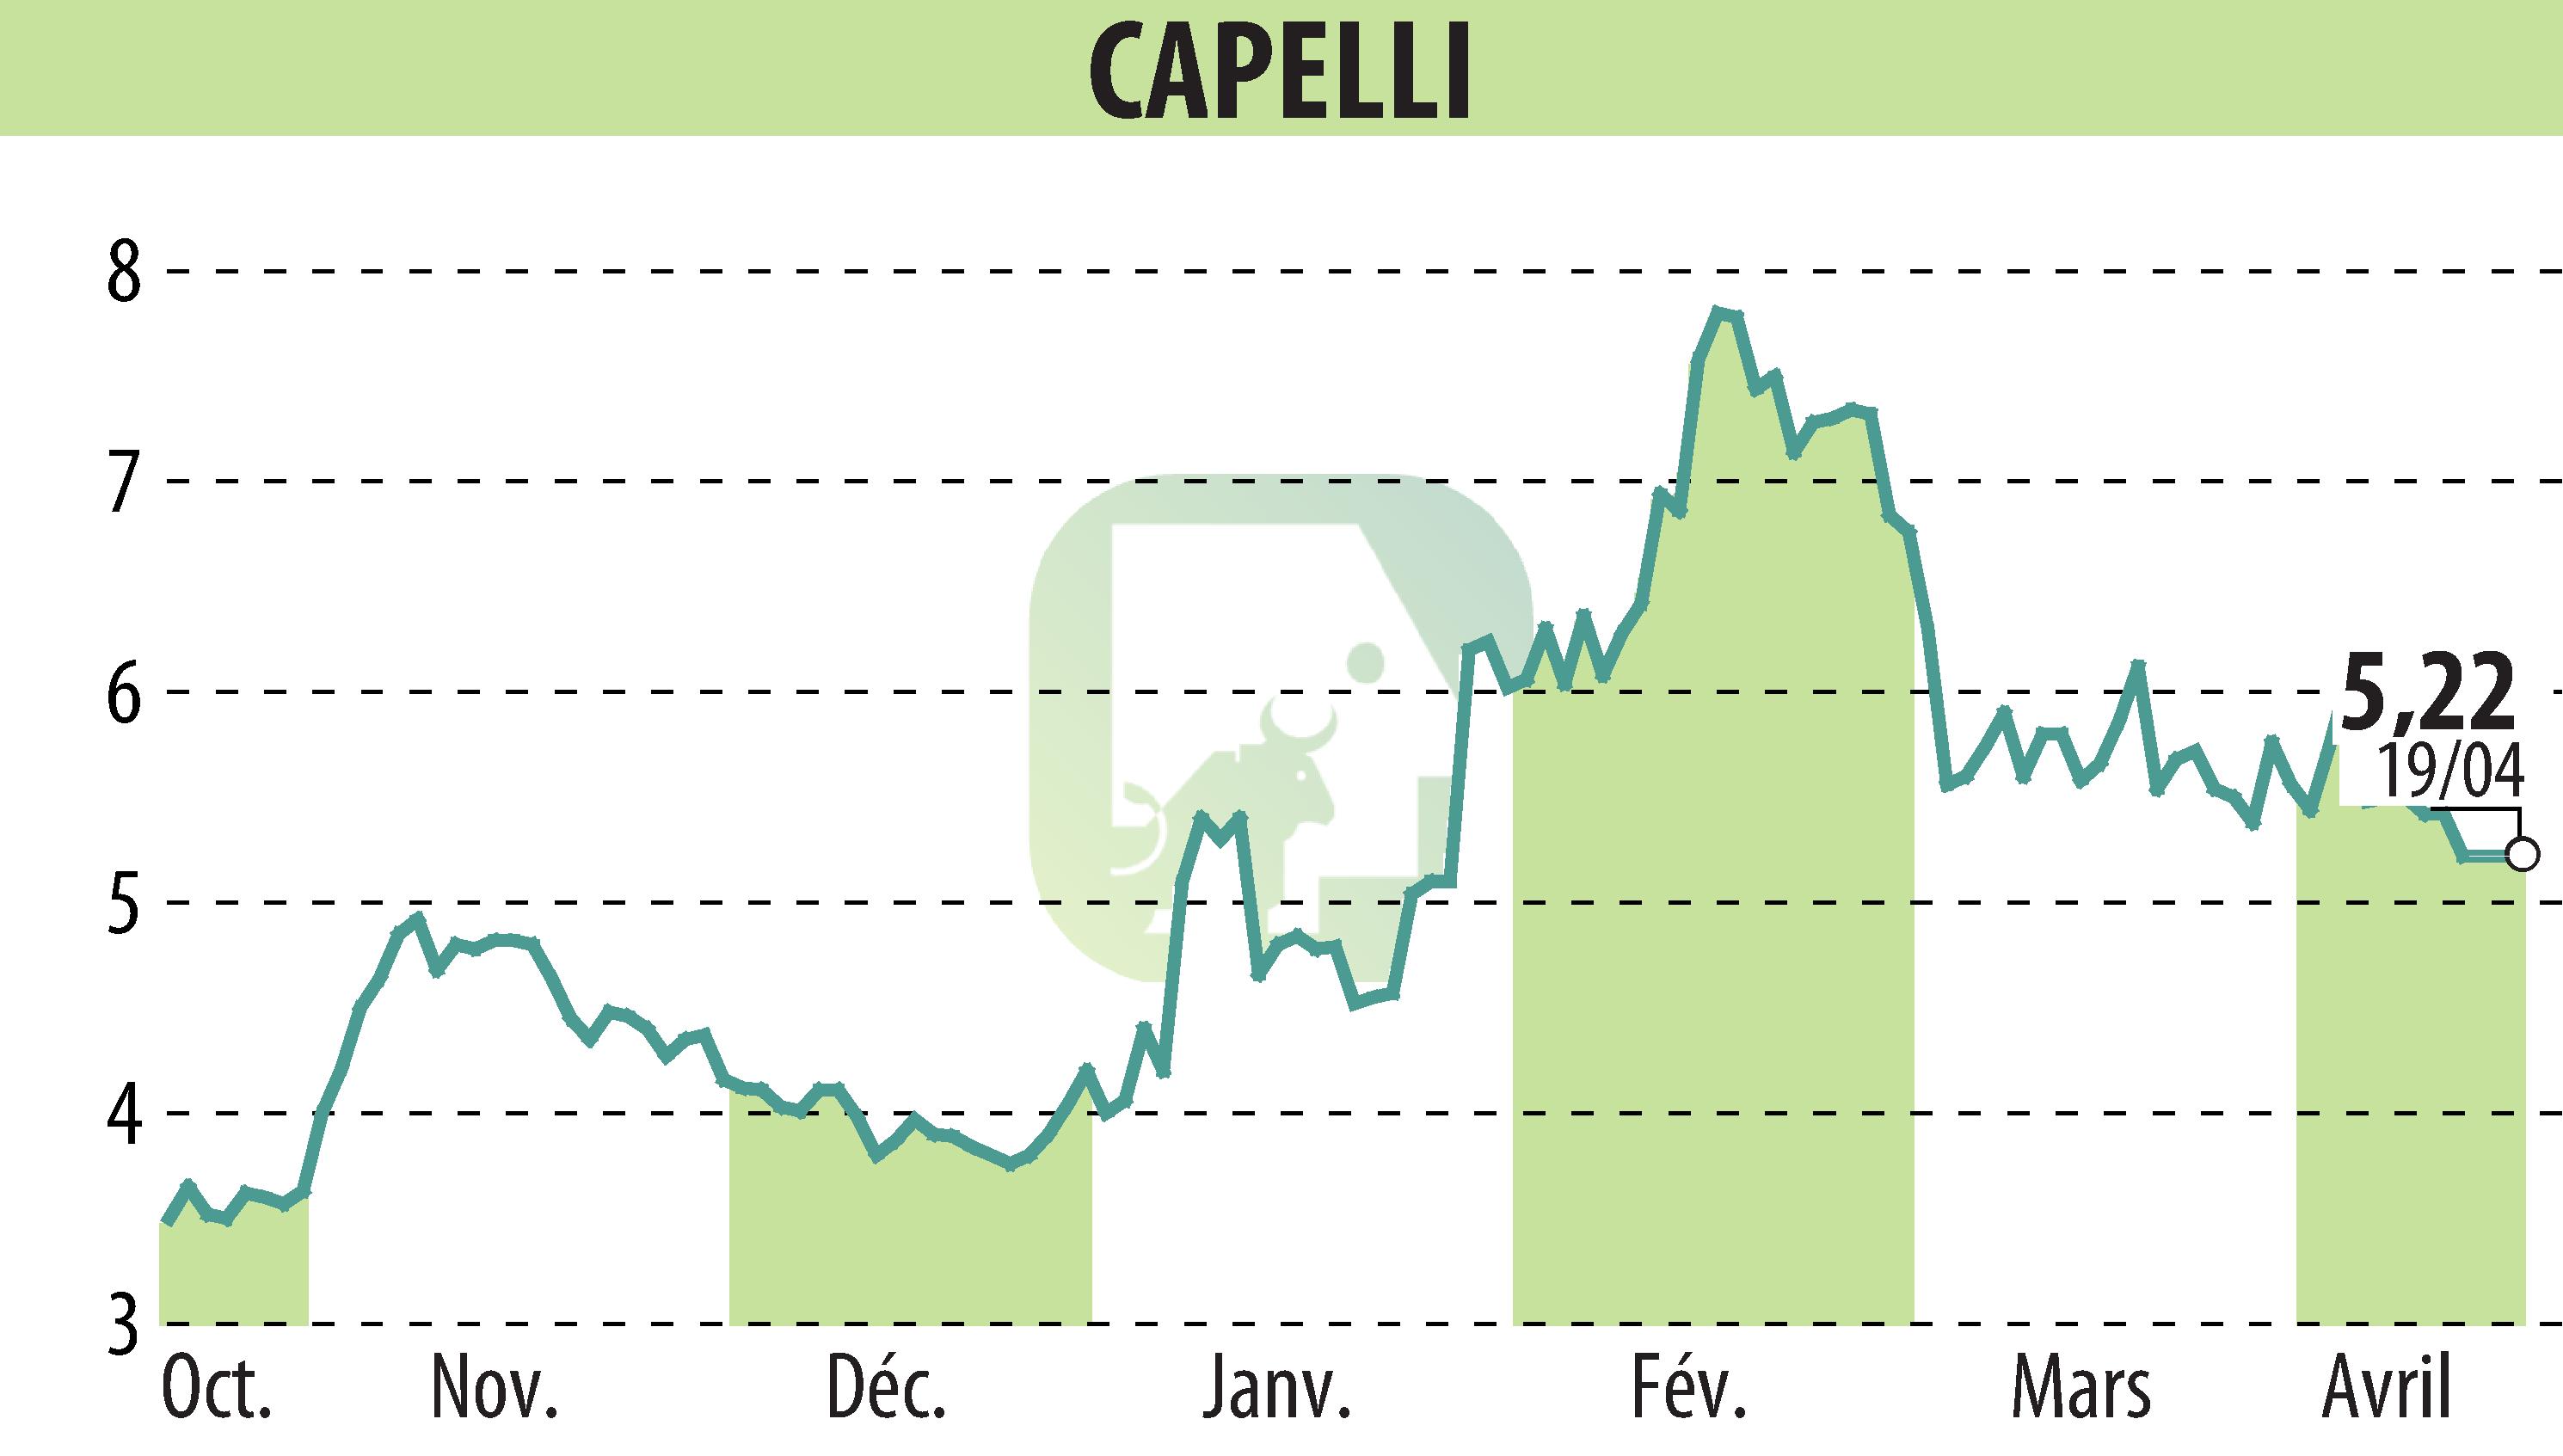 Stock price chart of CAPELLI (EPA:ALCAP) showing fluctuations.